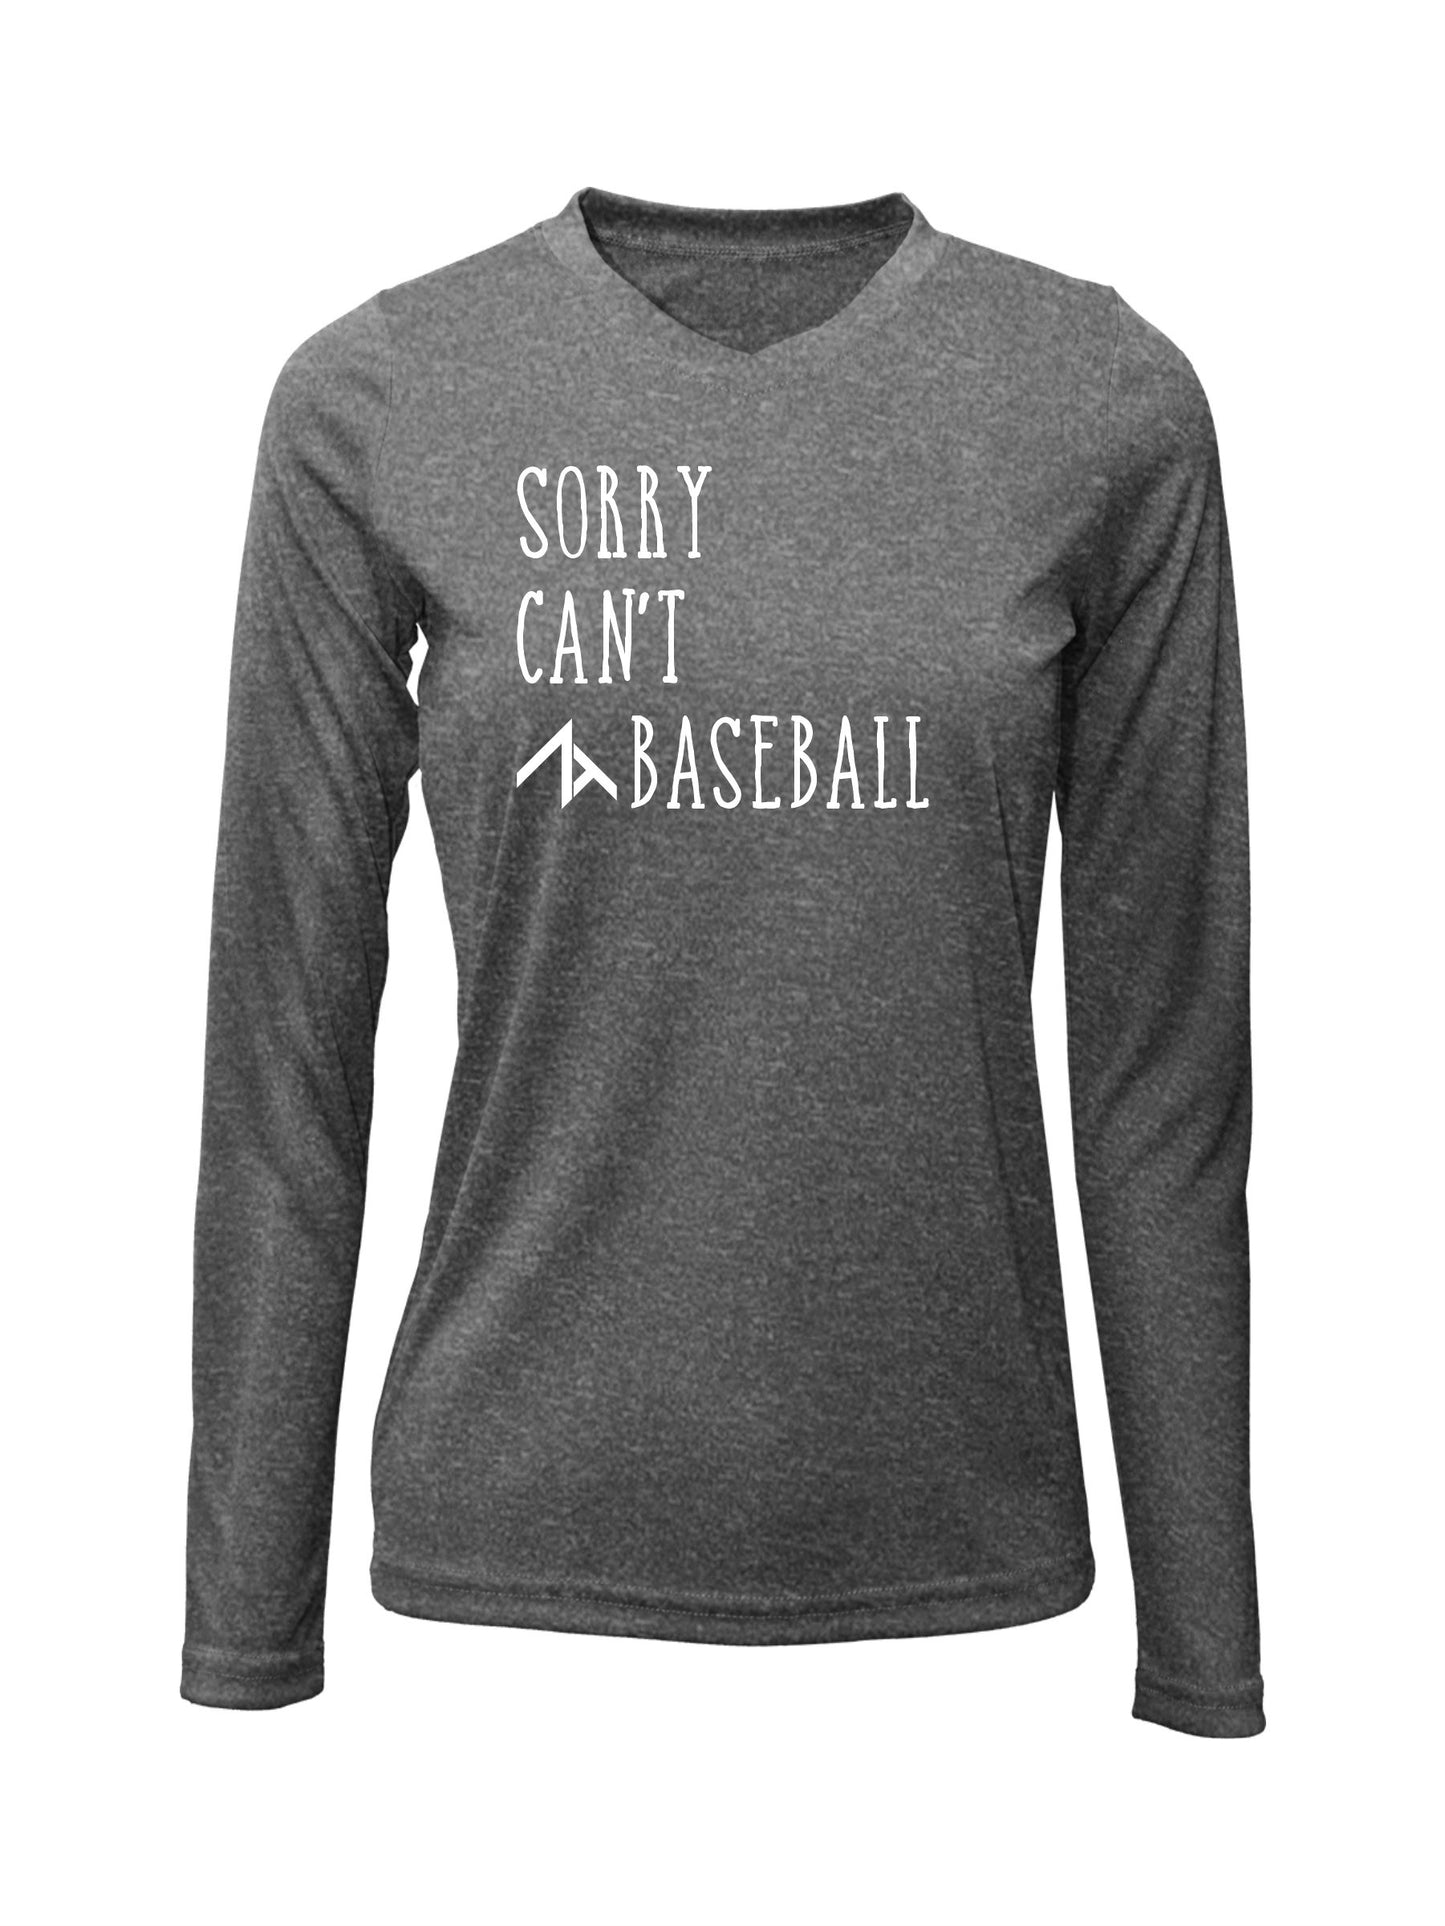 V-Neck Long Sleeve "SORRY CAN'T" Dri-Fit T-shirt